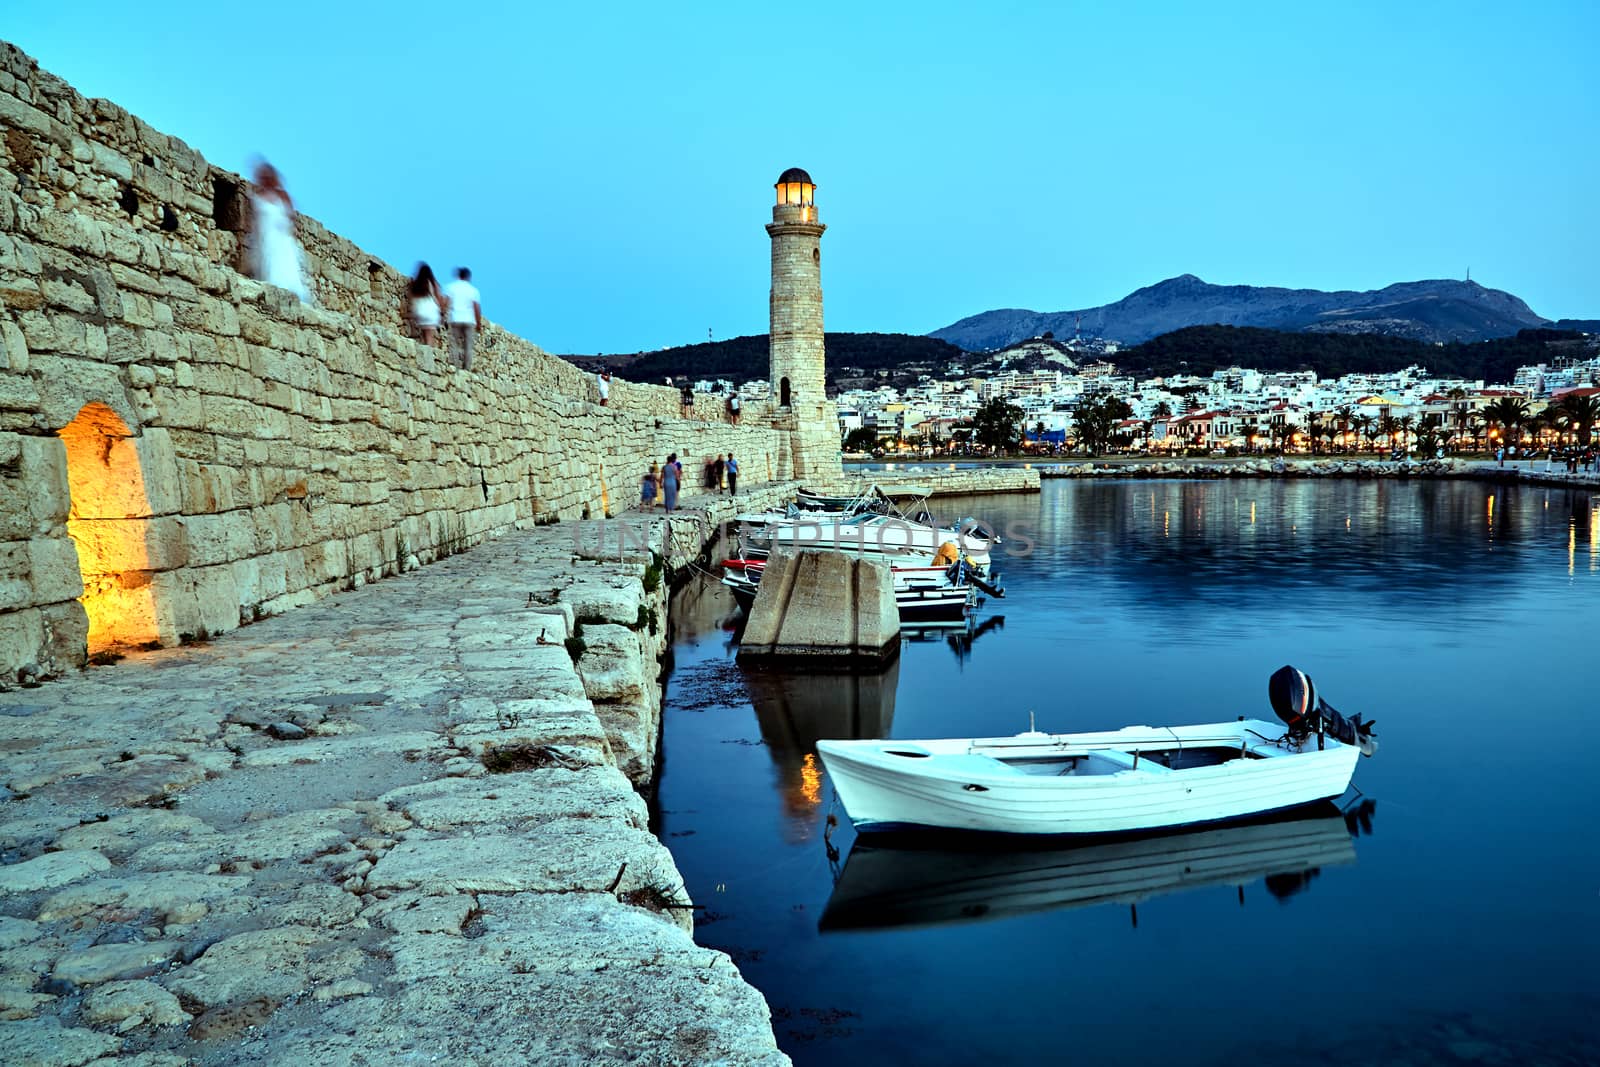 stone wall and historic lighthouse in the port of Rethymnon on the island of Crete